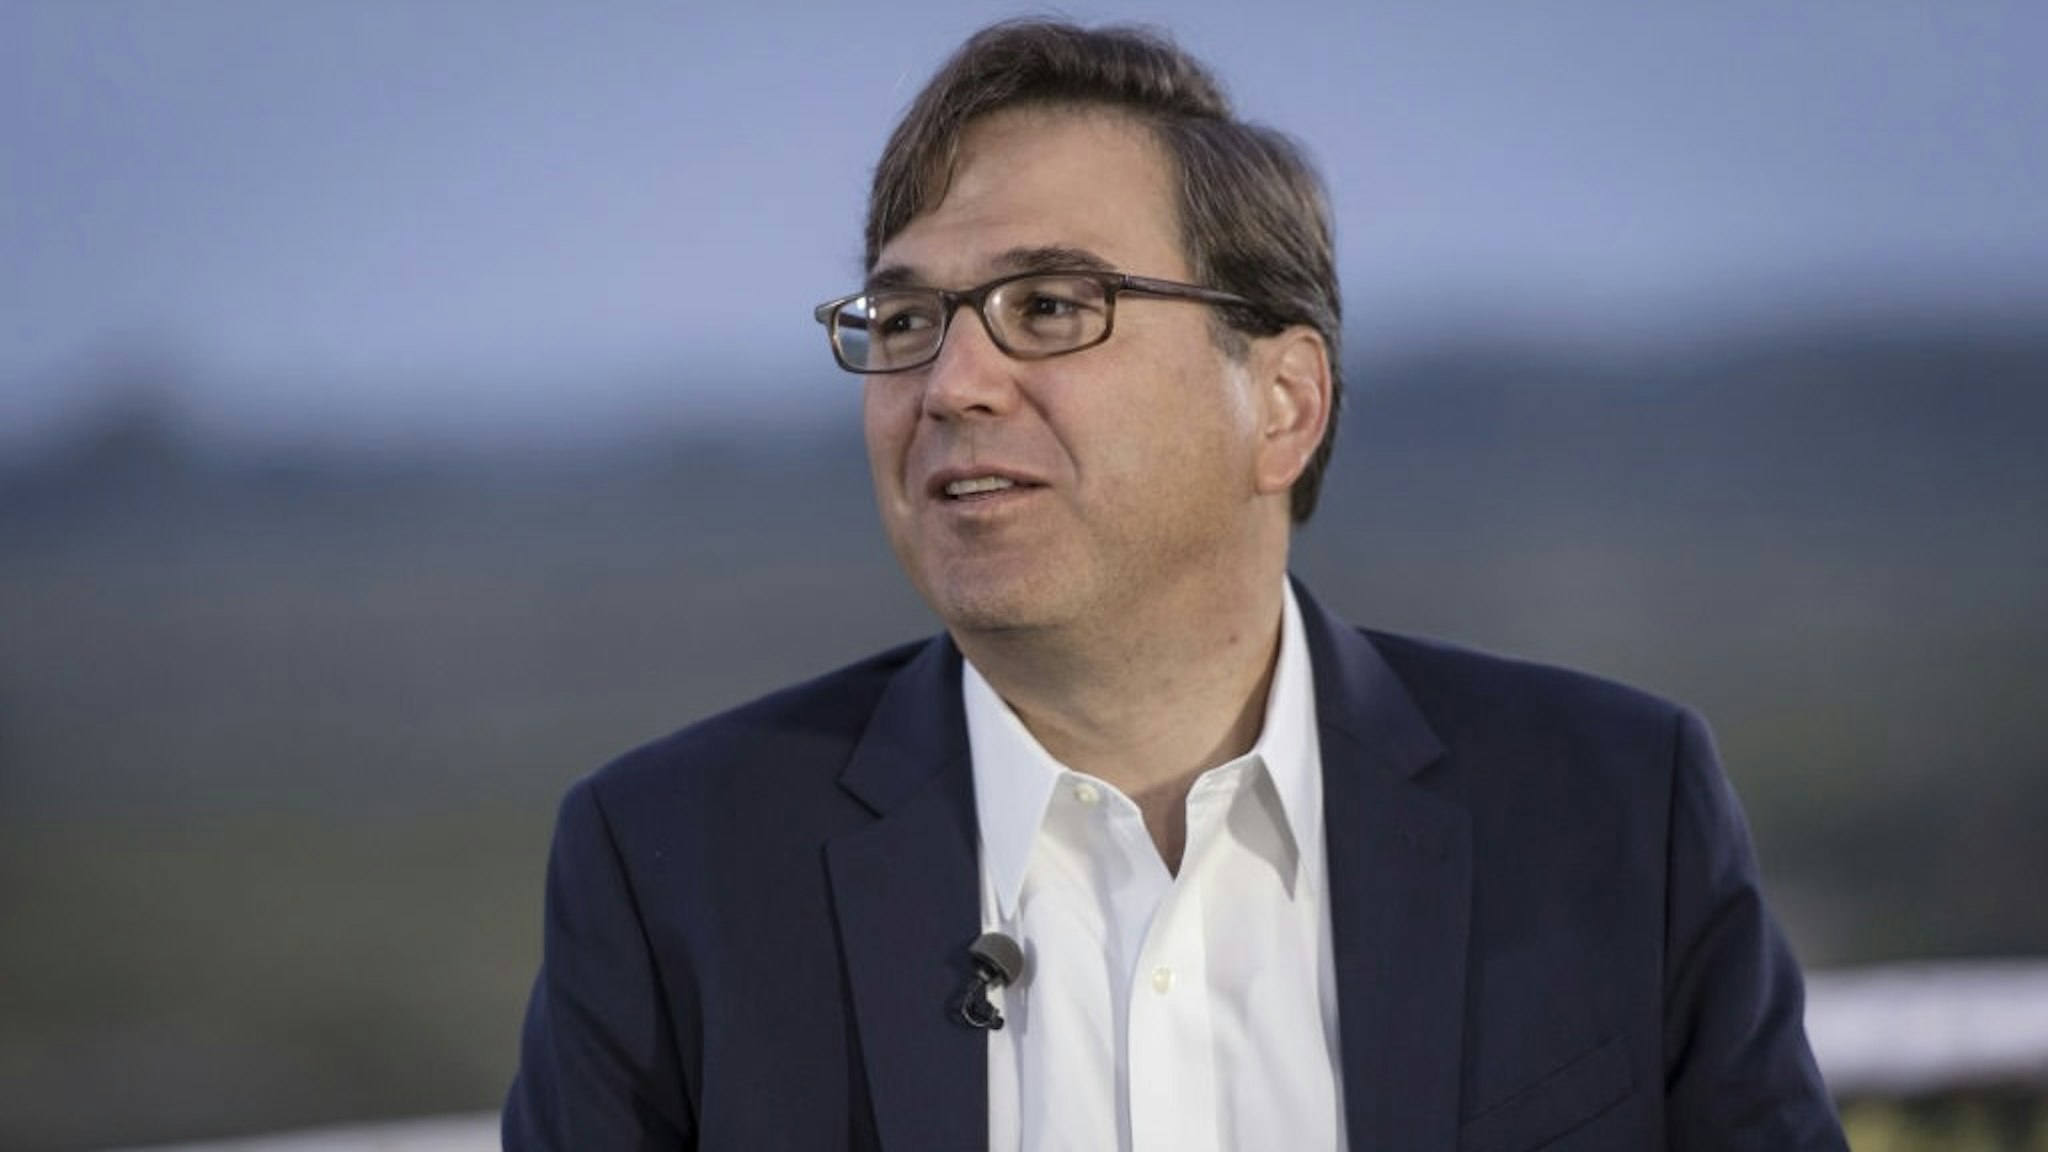 Jason Furman, professor at the Harvard Kennedy School, speaks during a Bloomberg Television interview at the Jackson Hole economic symposium, sponsored by the Federal Reserve Bank of Kansas City, in Moran, Wyoming, U.S., on Friday, Aug. 24, 2018.